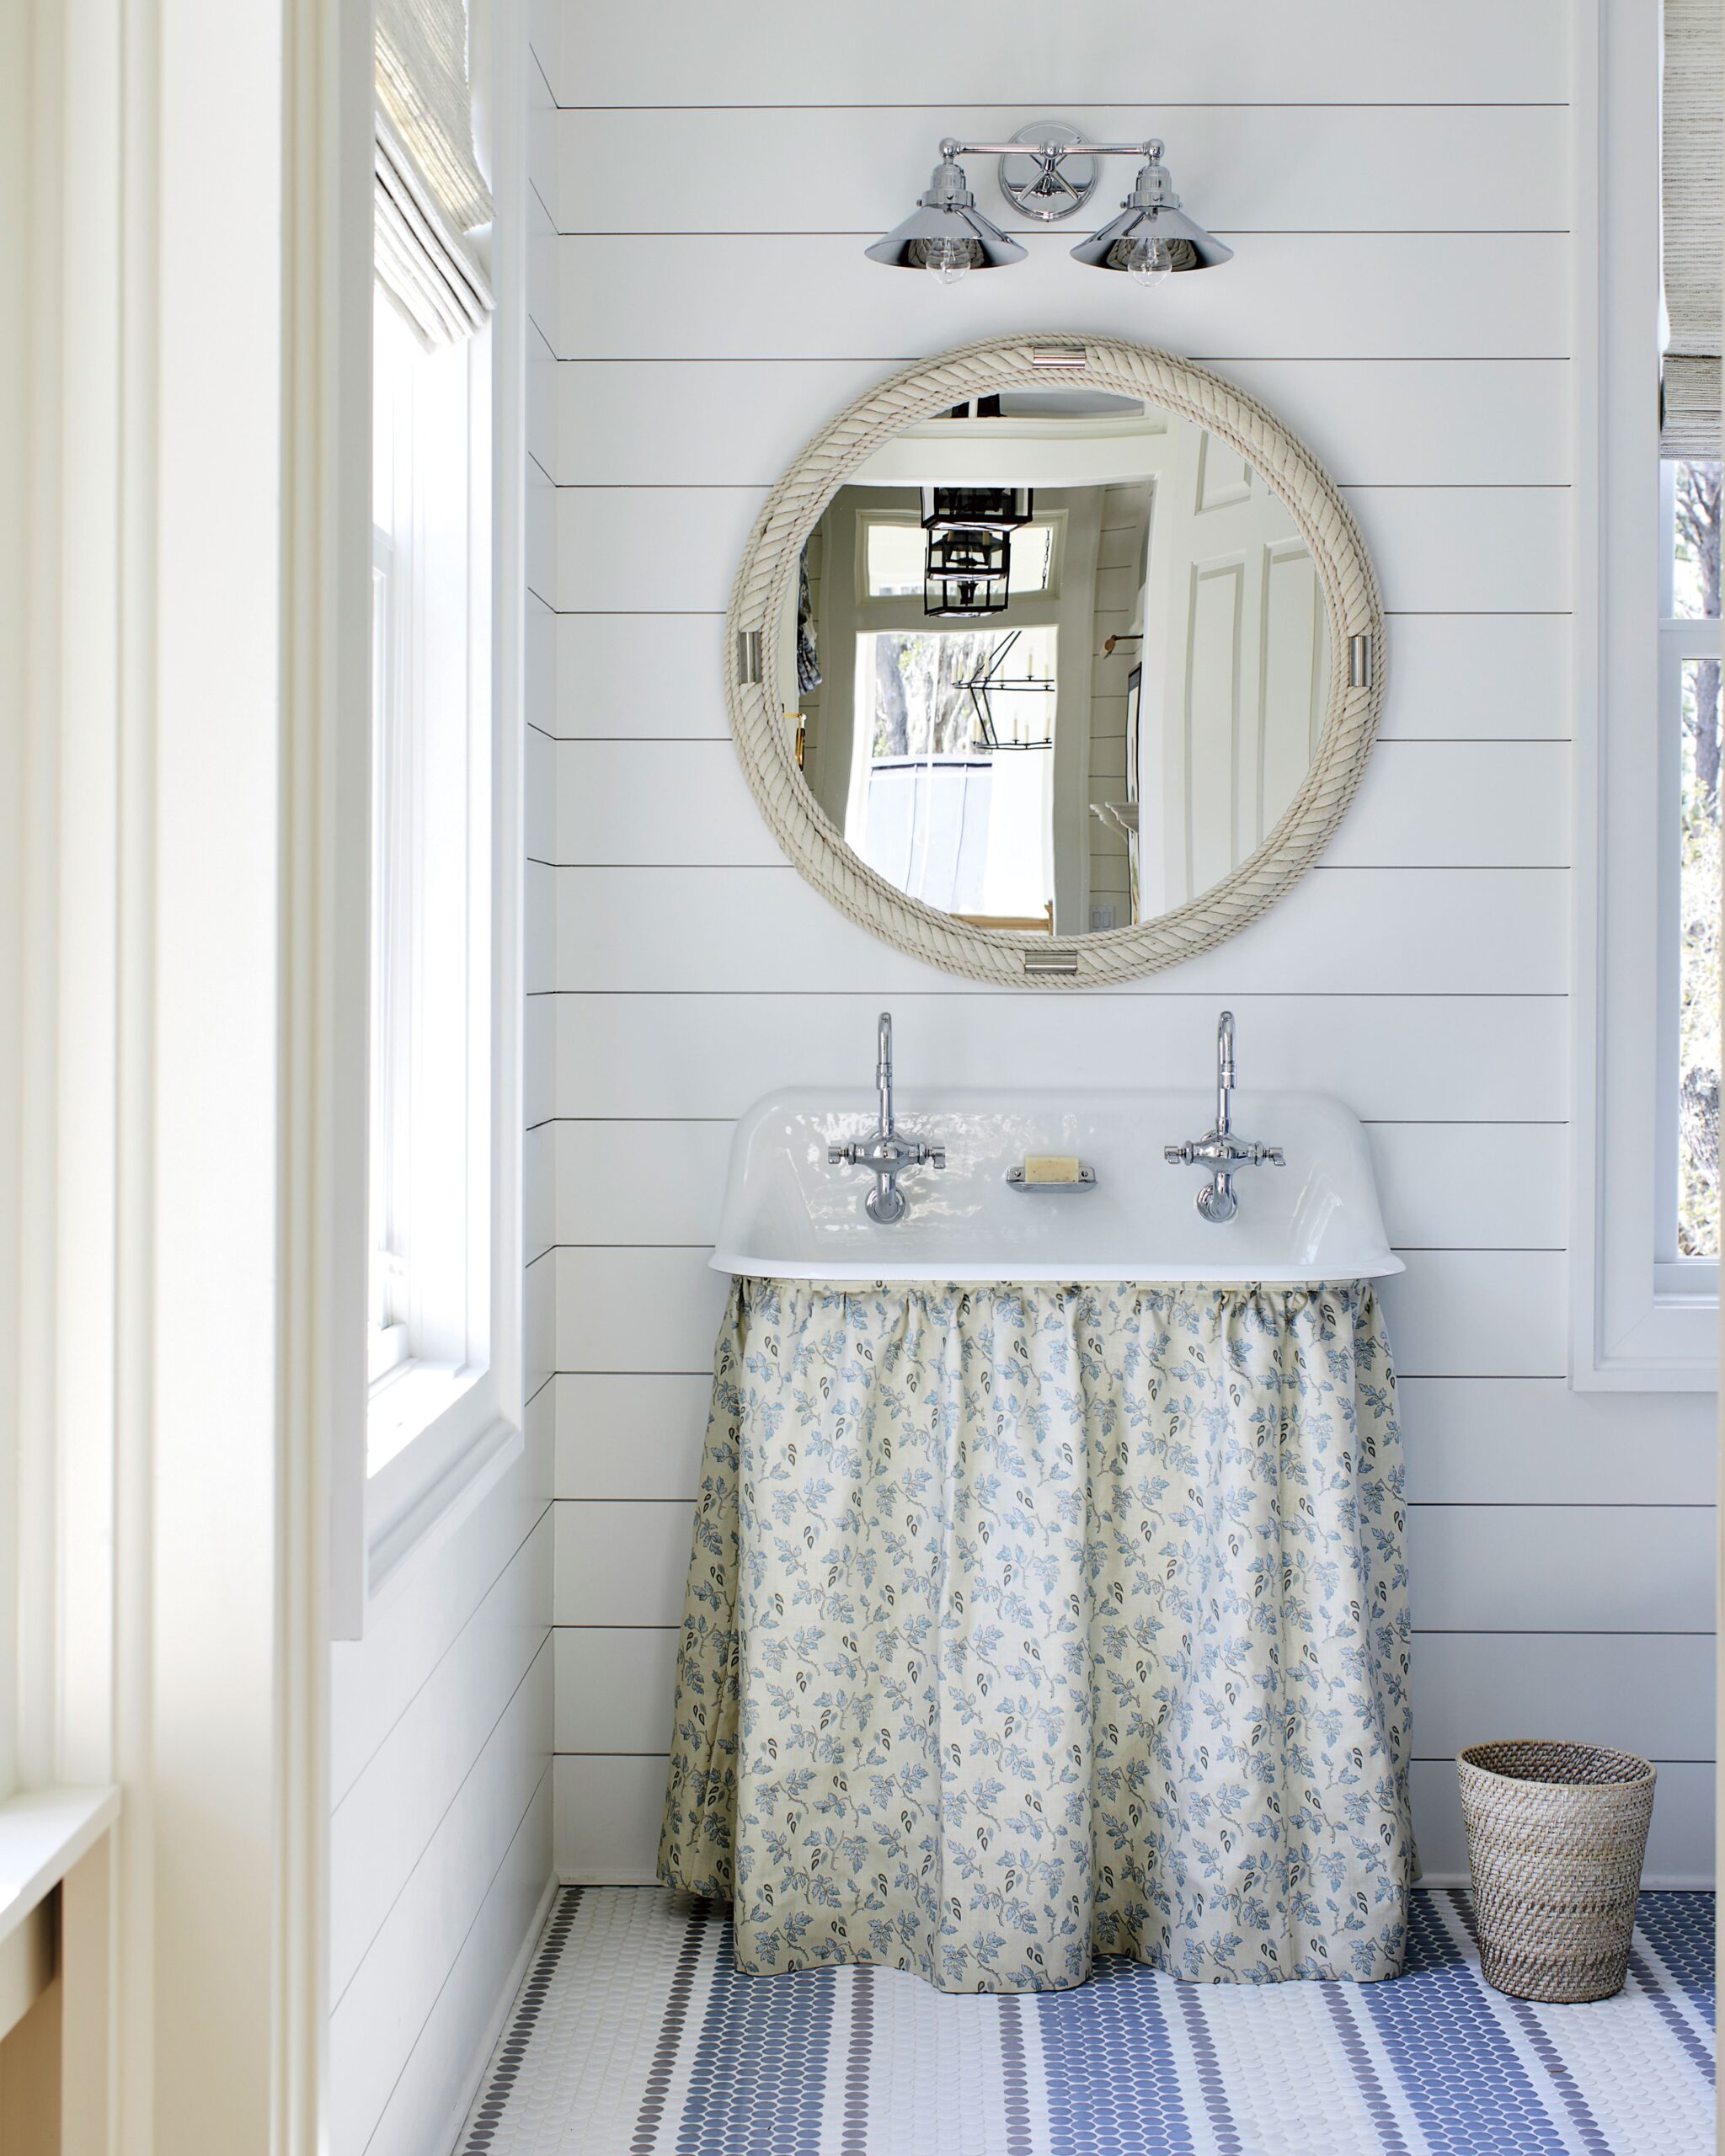 Bathroom idea in coastal inspired home tour with blue and white details